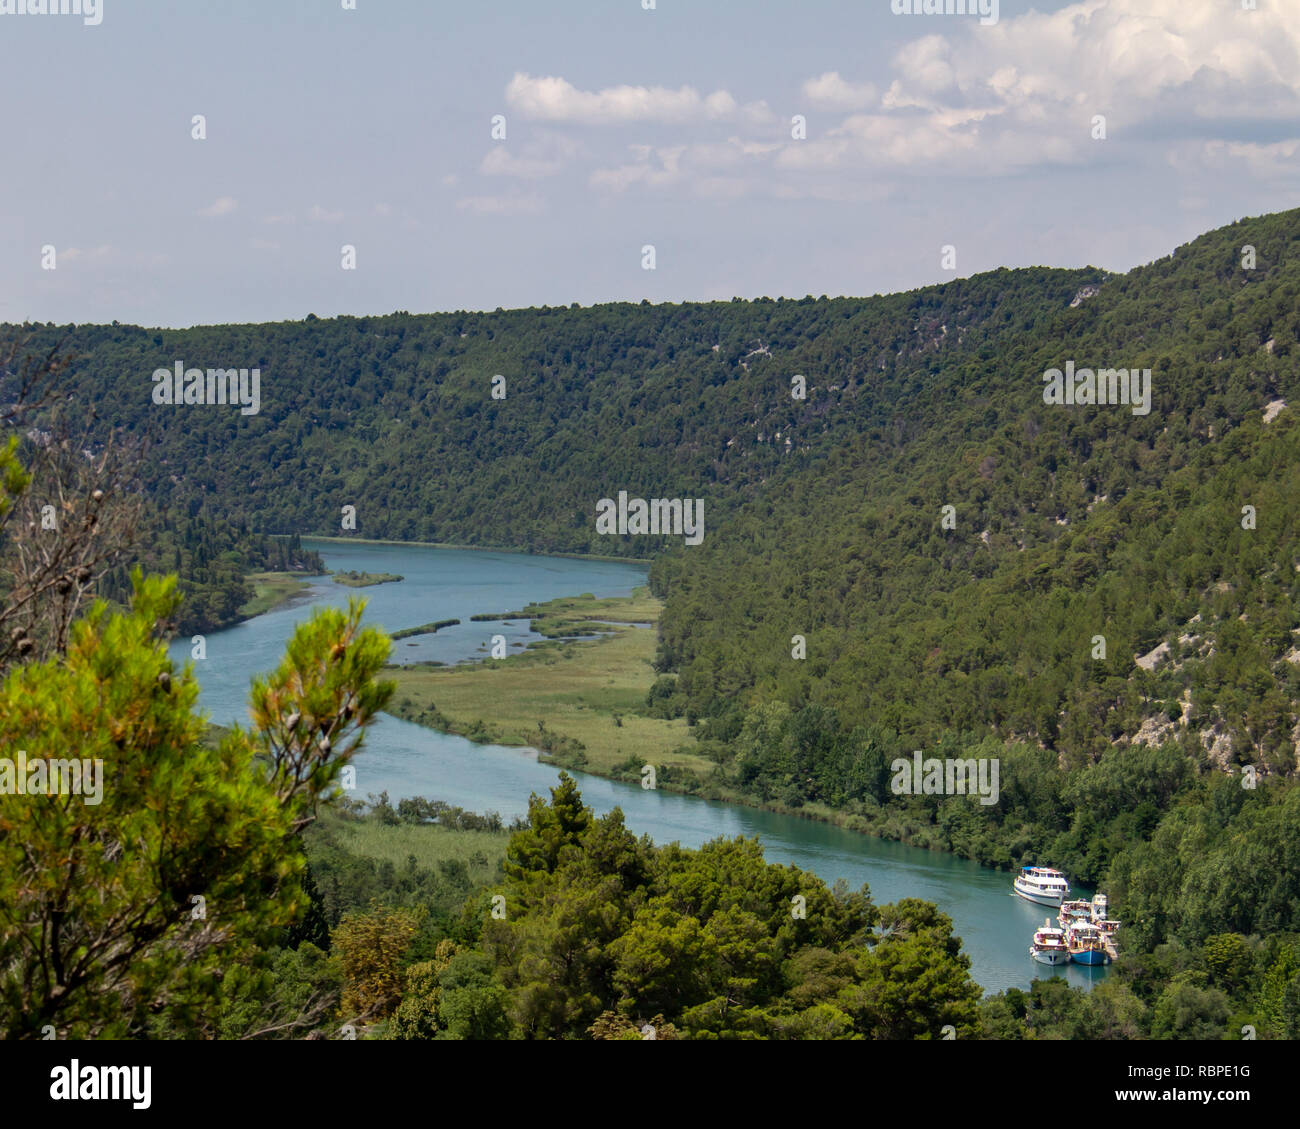 Boats are docked on the Krka River in the Krka National Park in Croatia Stock Photo